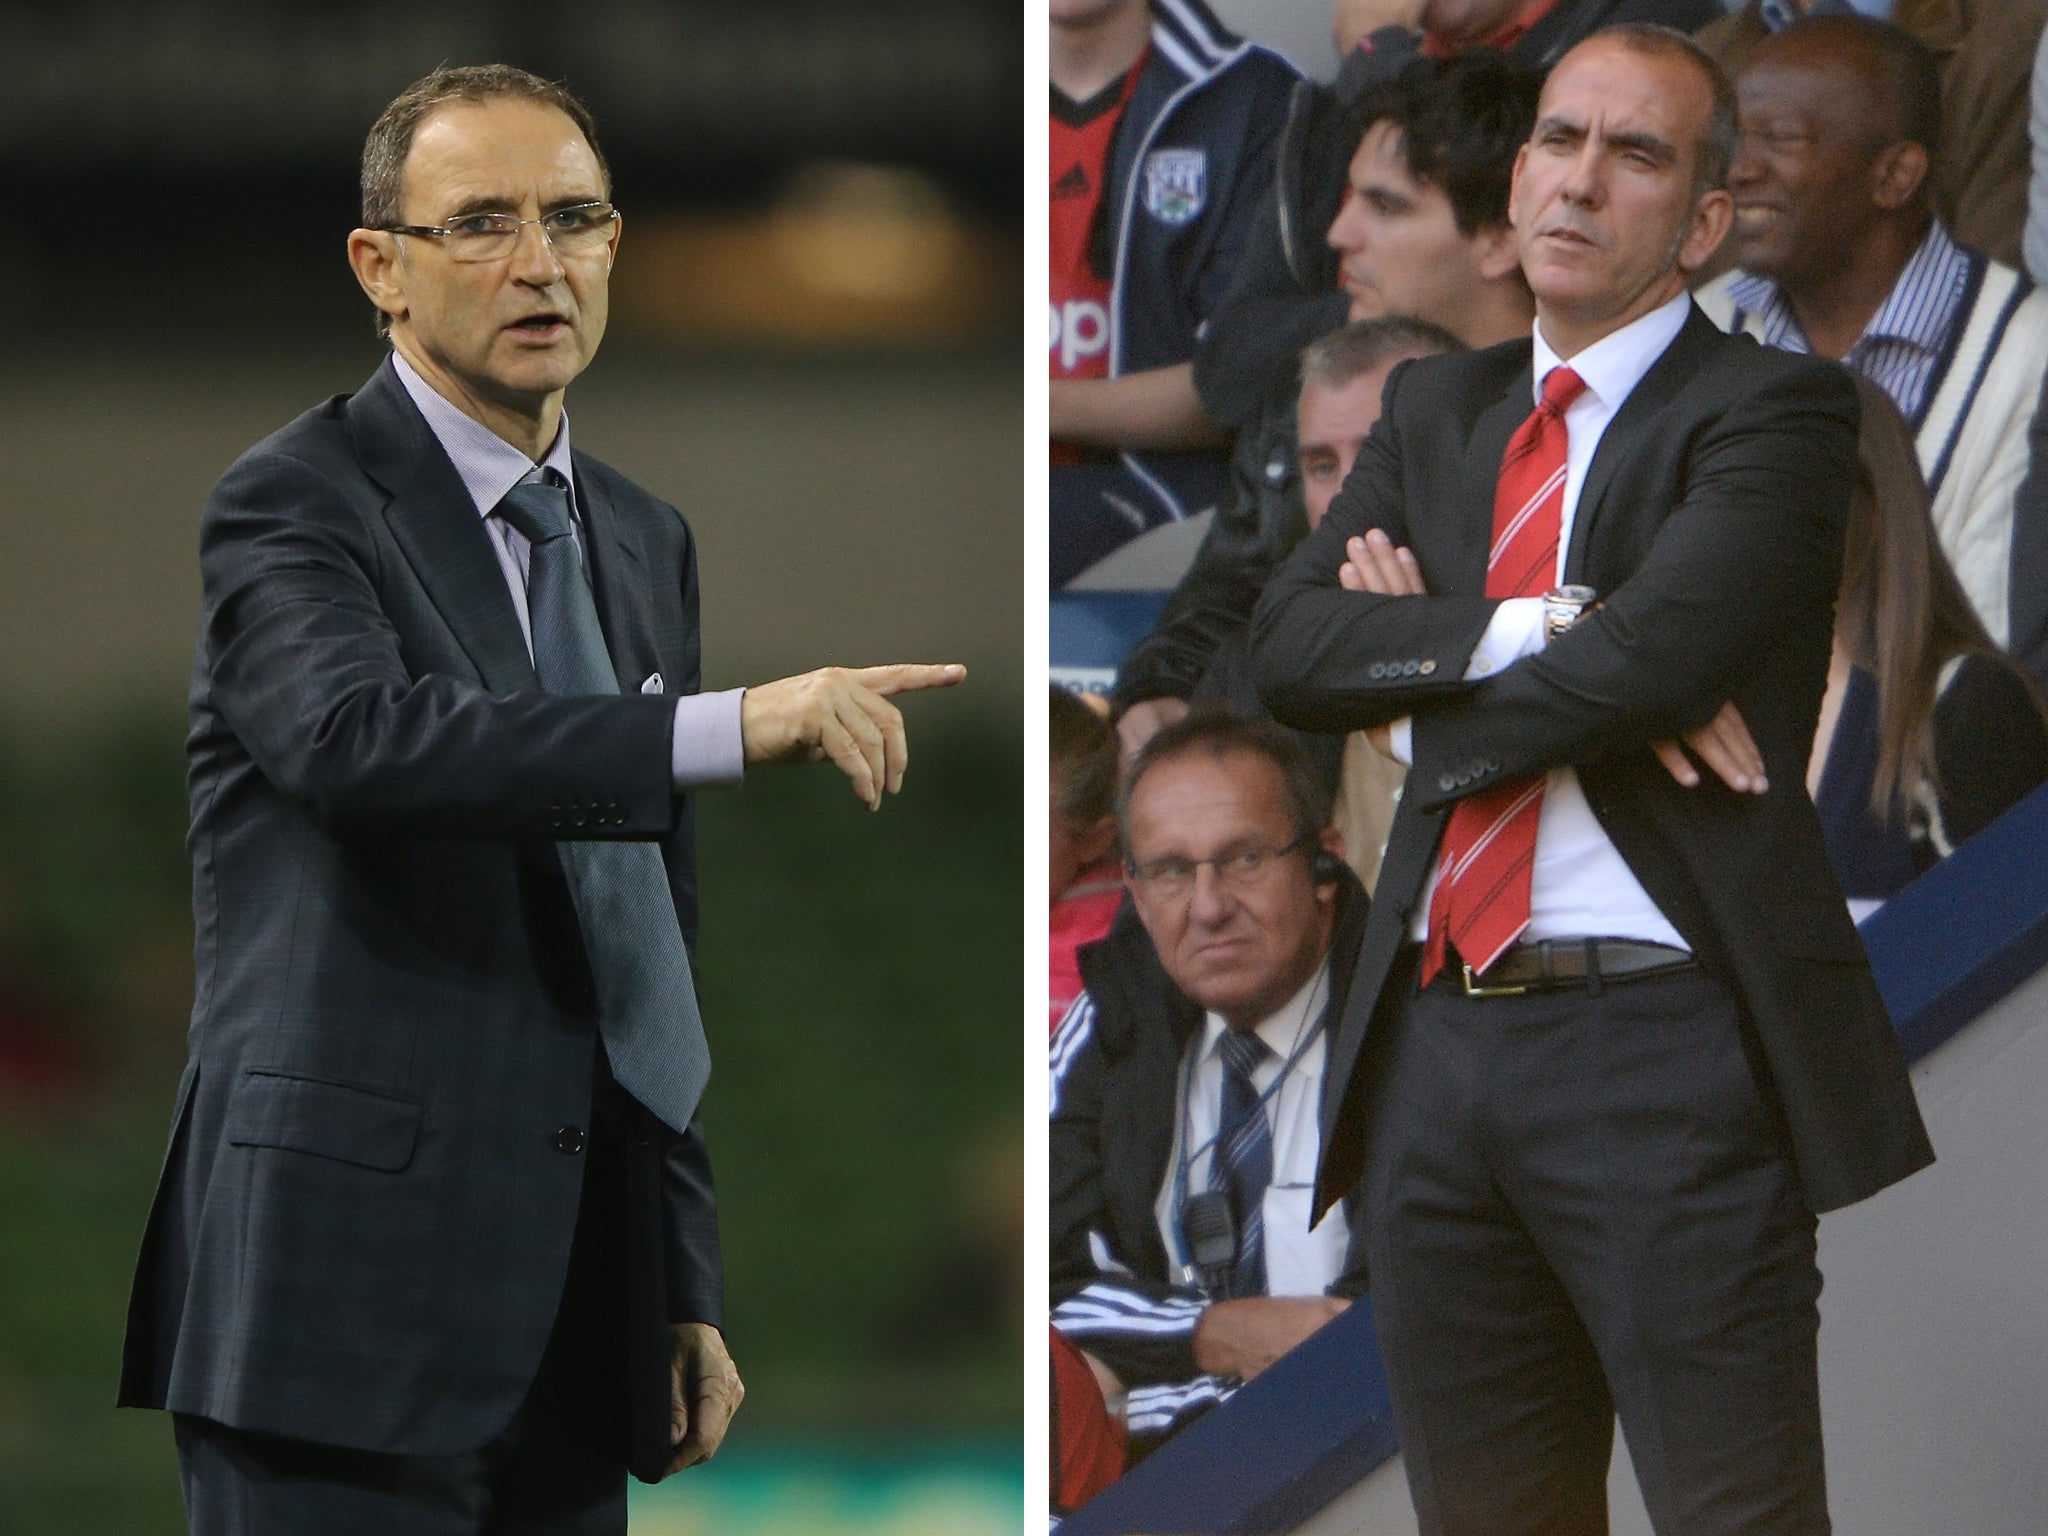 Martin O'Neill has hit back at Paolo Di Canio over the Sunderland 'charlatan' row